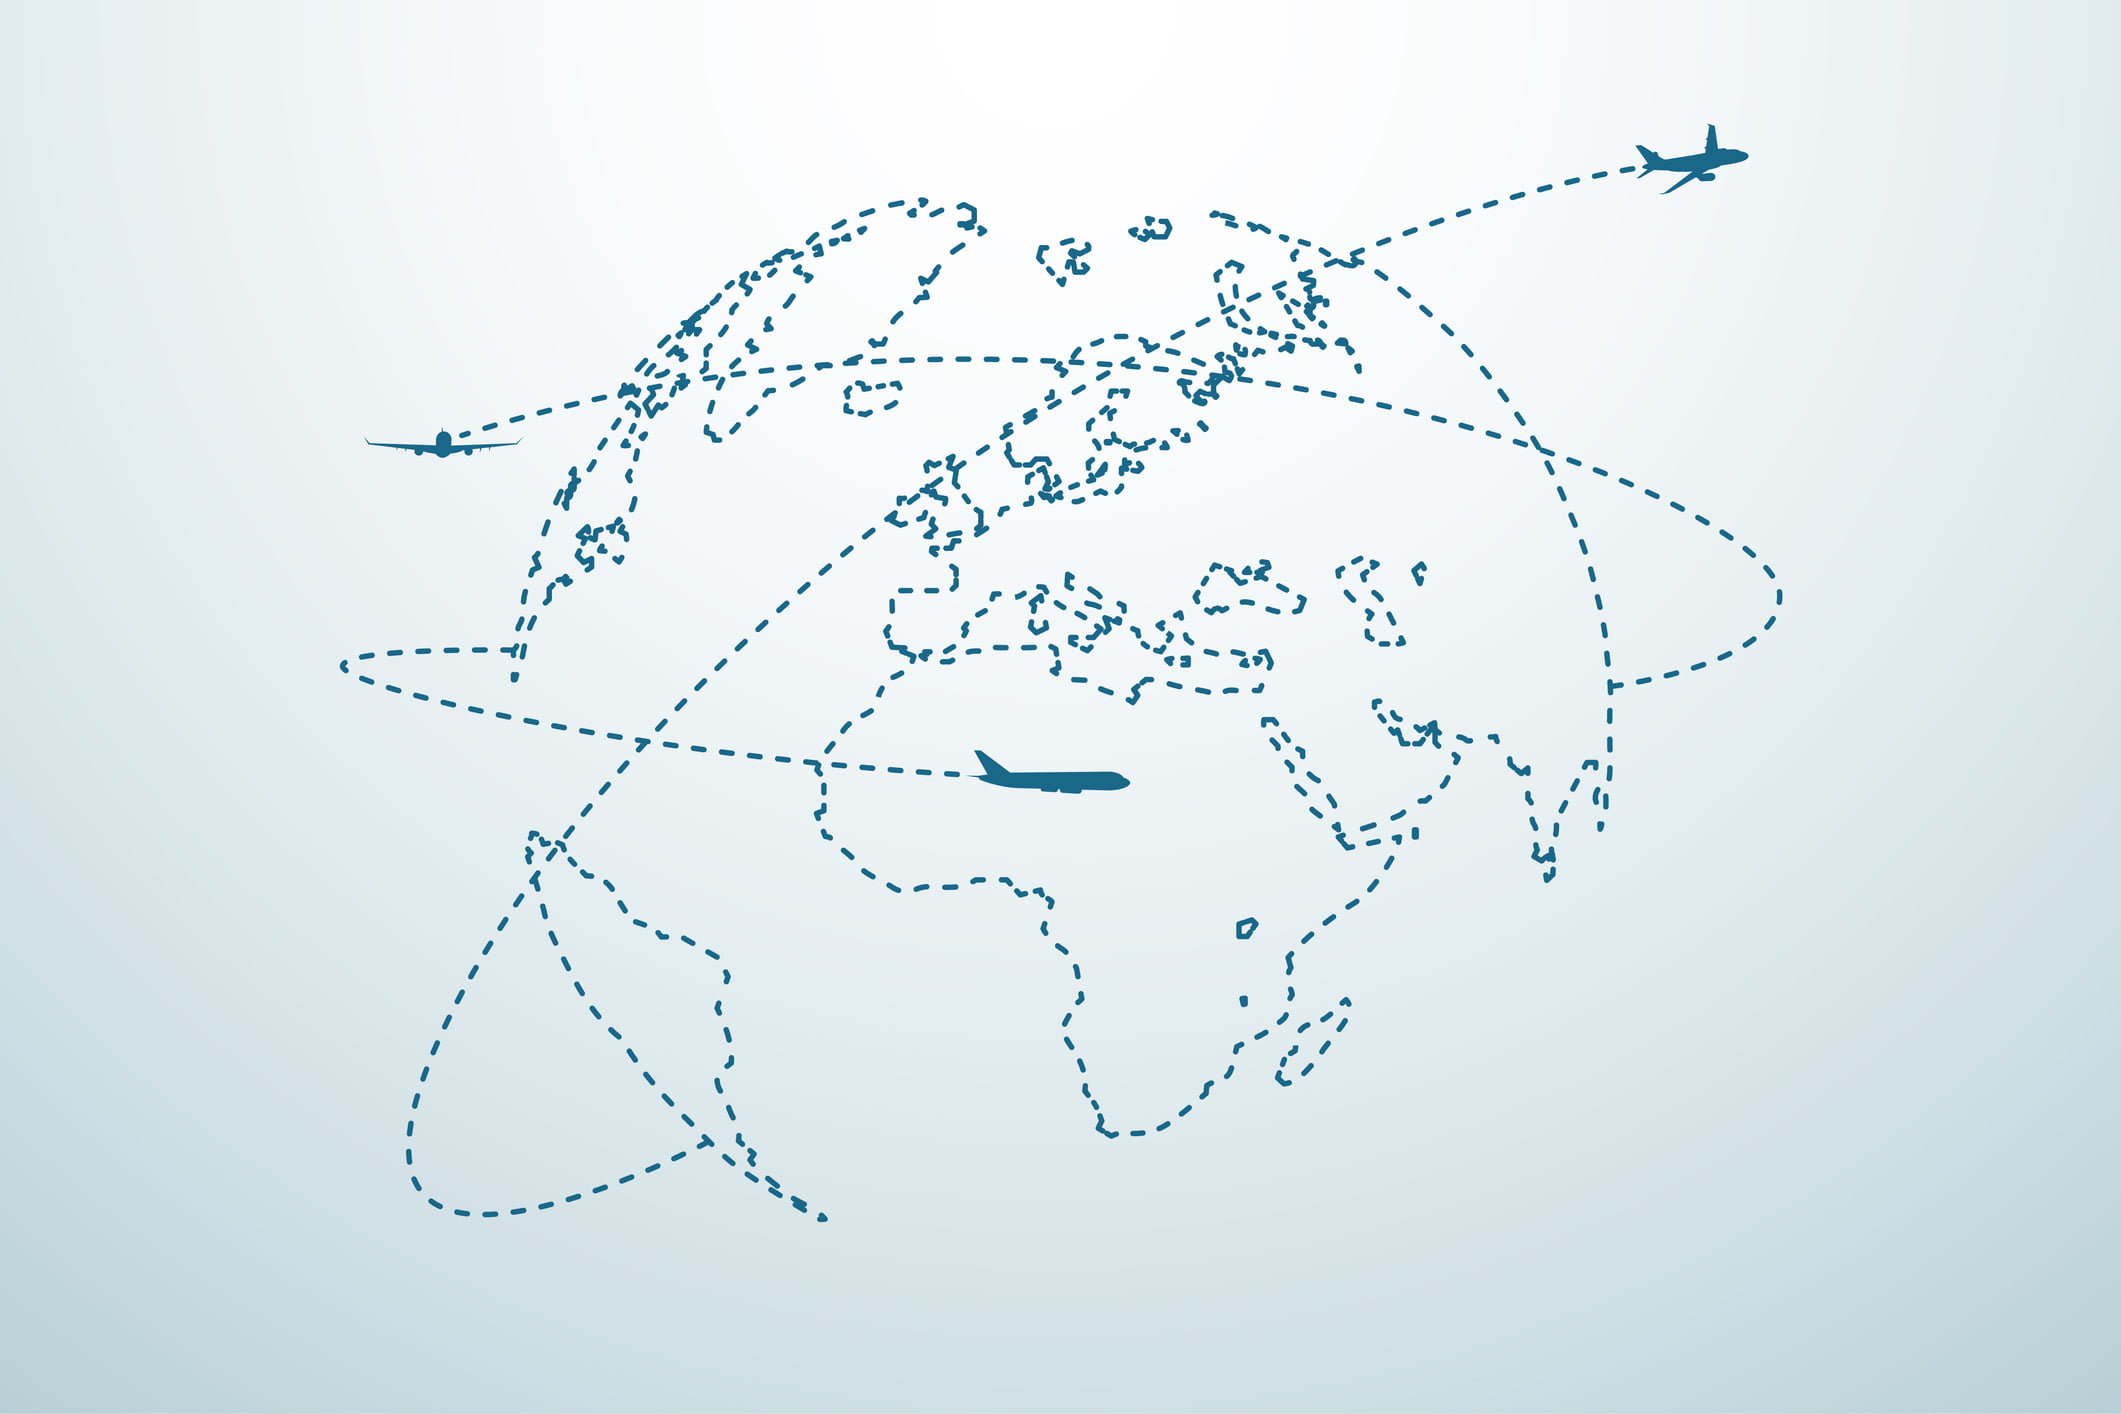 Airplane line path with map in vector